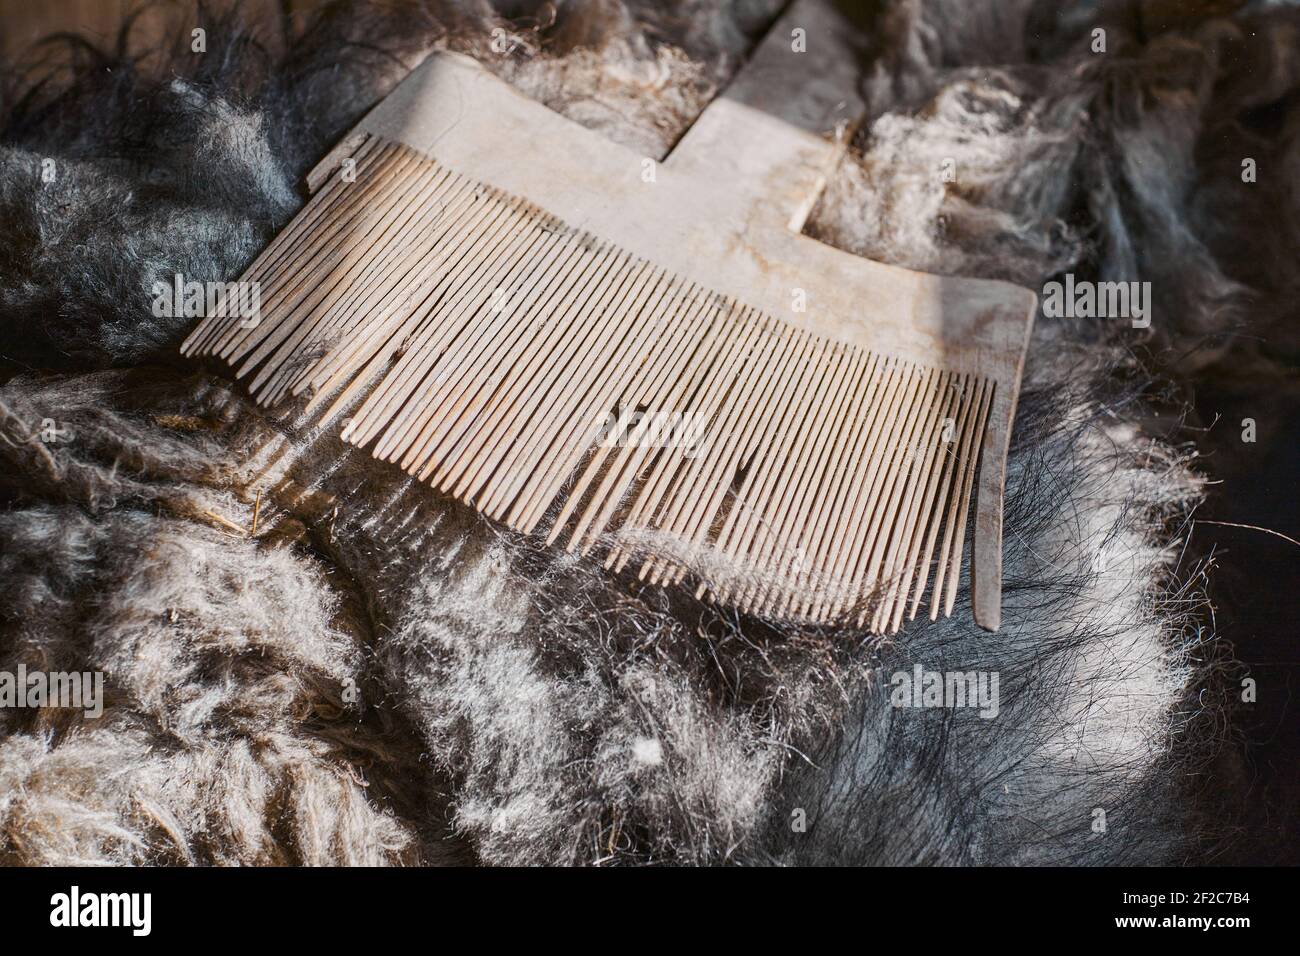 An artificial wooden tool for combing sheep wool  for yarn and weaving. Handmade manufacturing concept Stock Photo